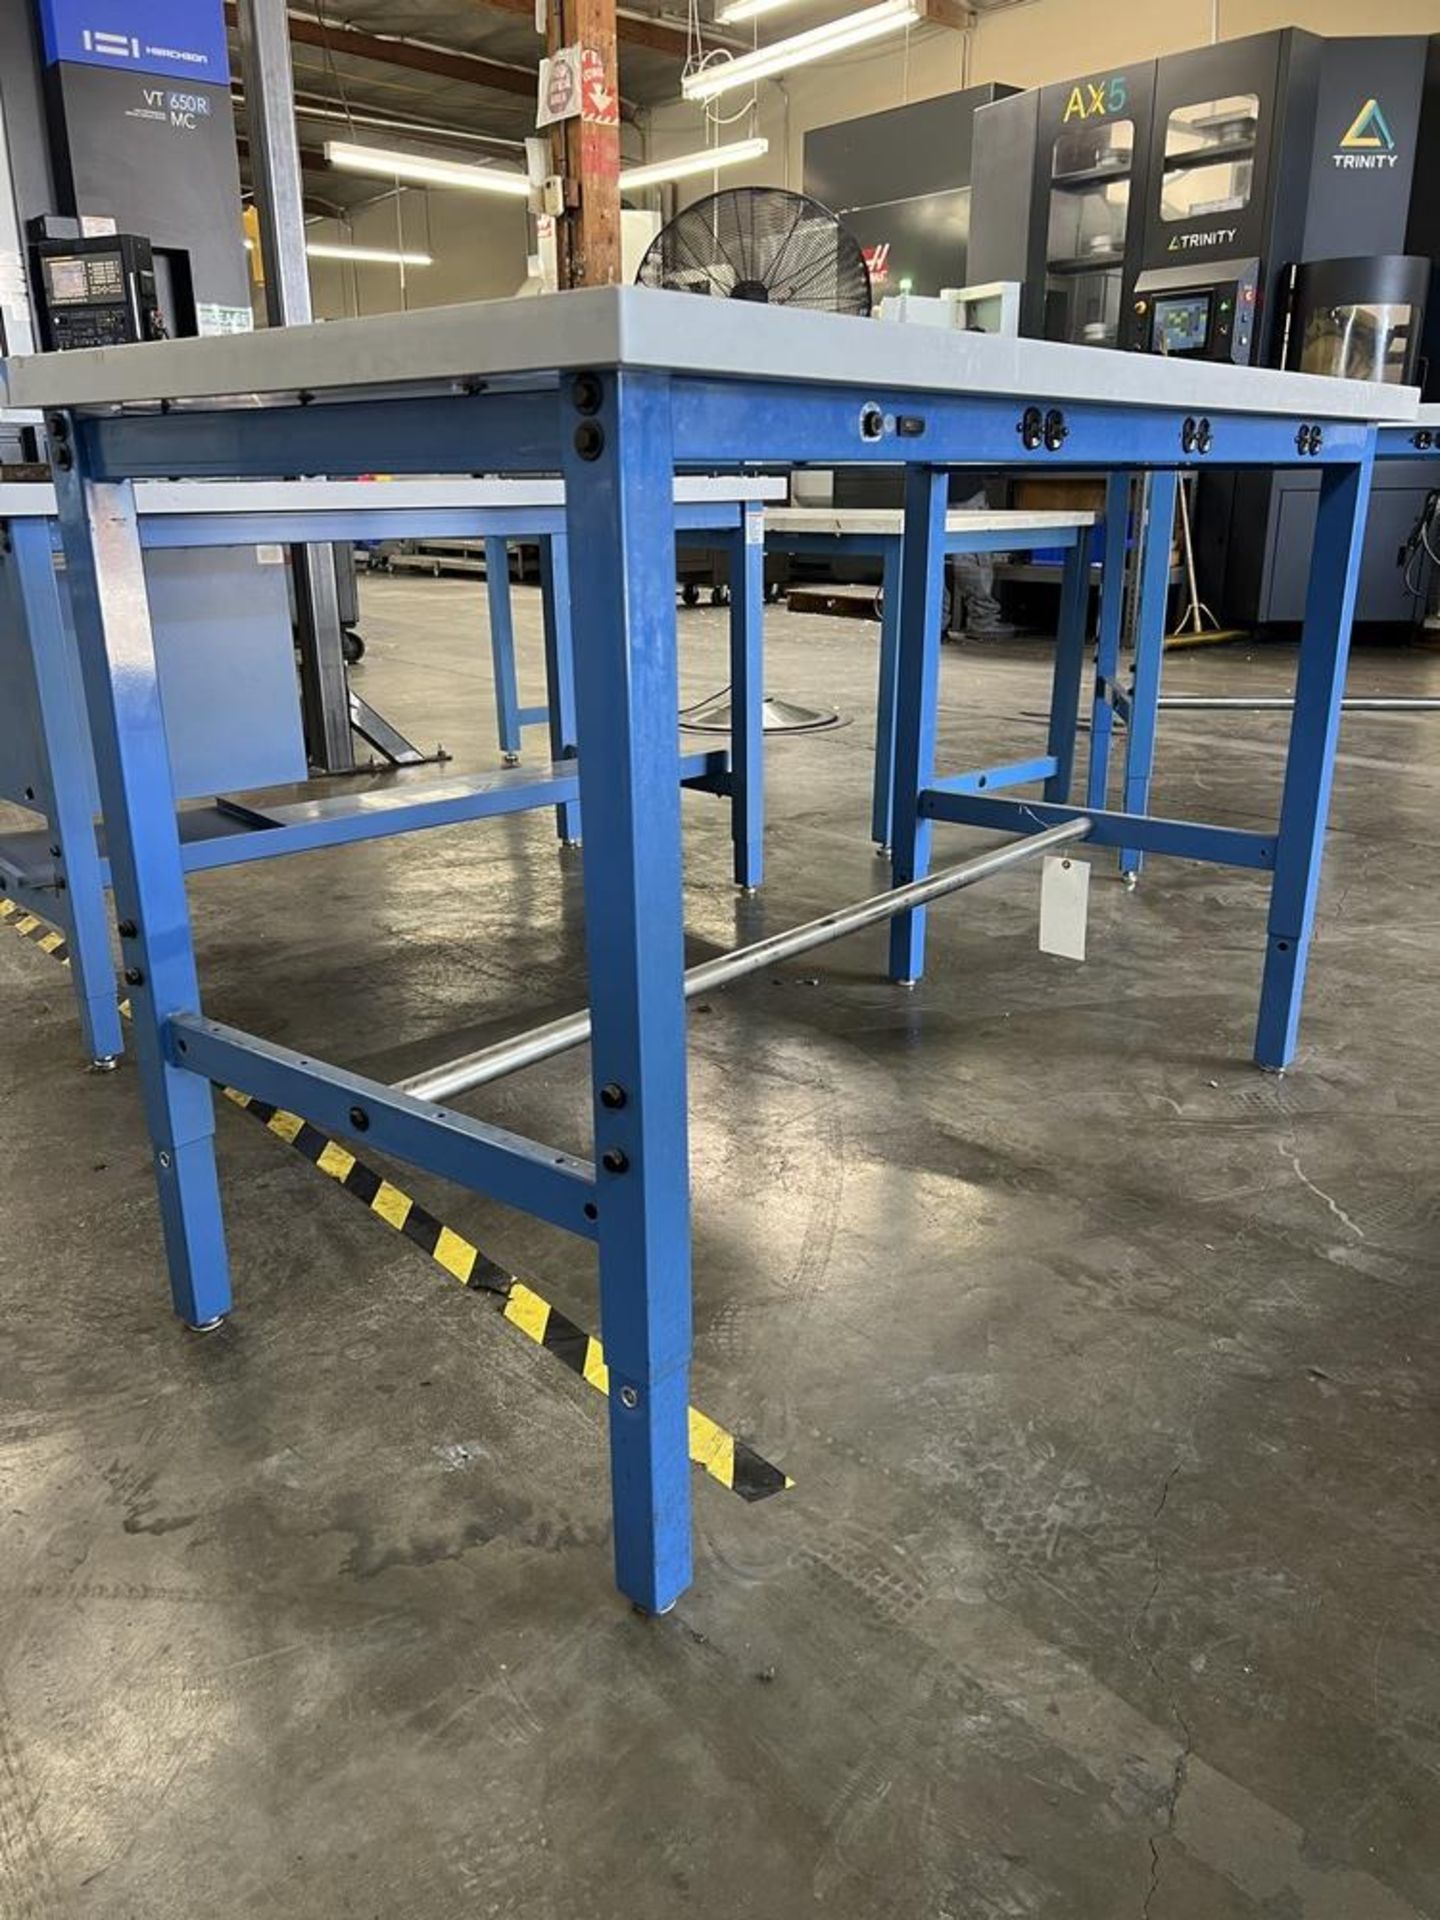 Global Industrial Adjustable Shop Table 60" x 30" x 38" With Built In Power Strip - Image 4 of 4